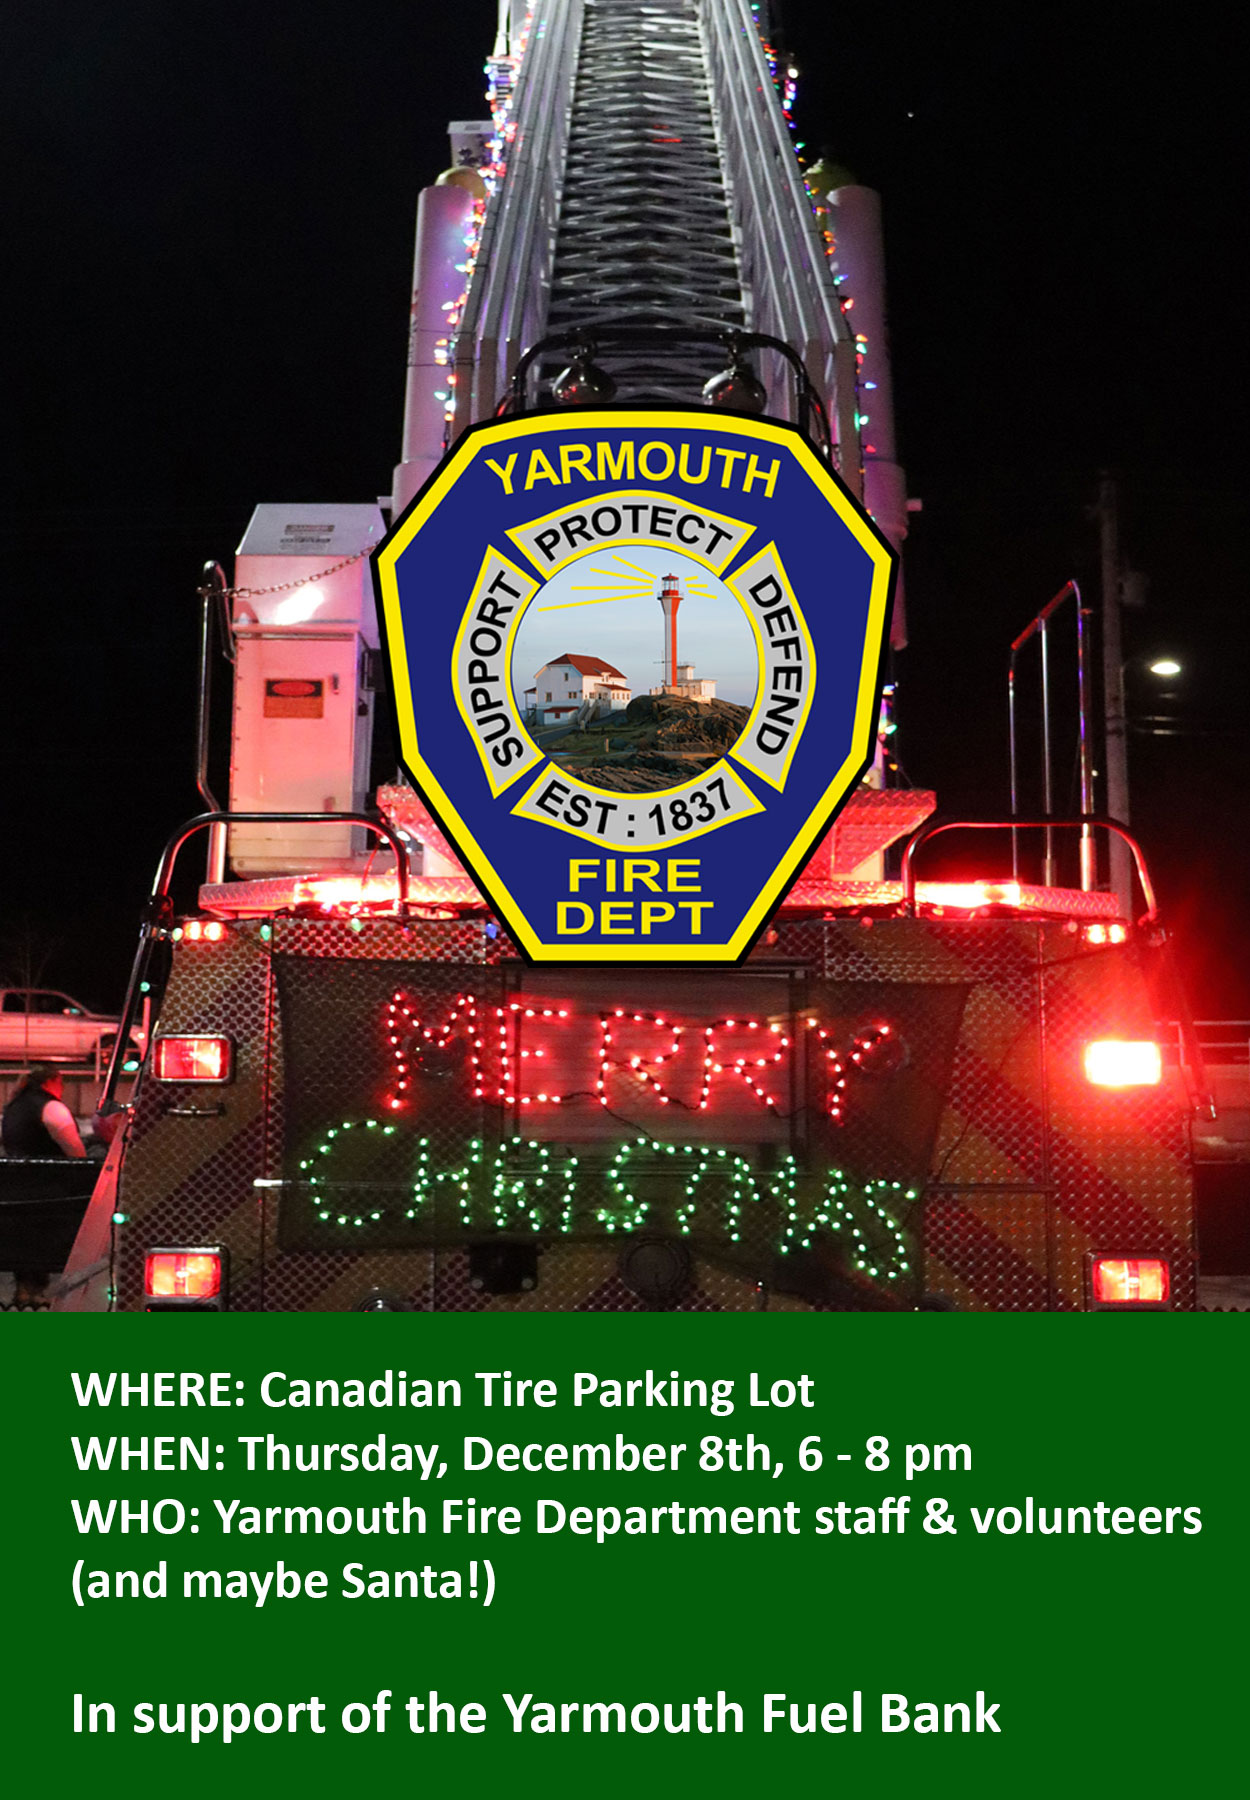 WHERE: Canadian Tire Parking Lot WHEN: Thursday, December 8th, 6 - 8 pm WHO: Yarmouth Fire Department staff & volunteers  (and maybe Santa!)  In support of the Yarmouth Fuel Bank